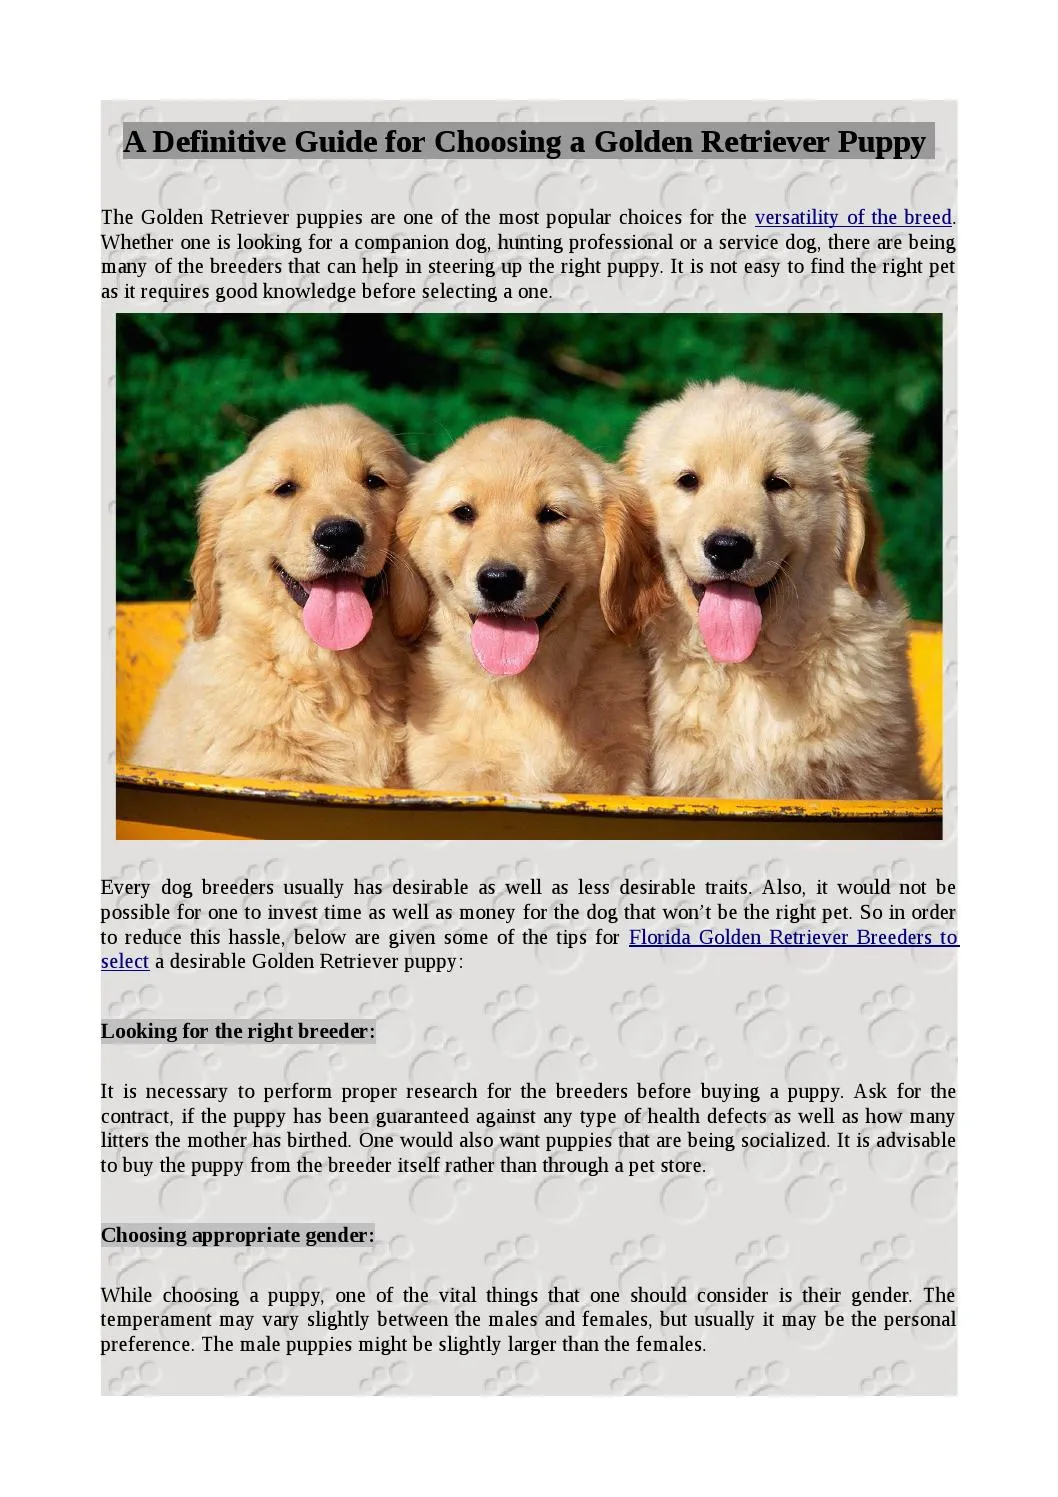 Finding the Perfect Golden Retriever: A Guide to Choosing a Reputable Breeder and Healthy Pup